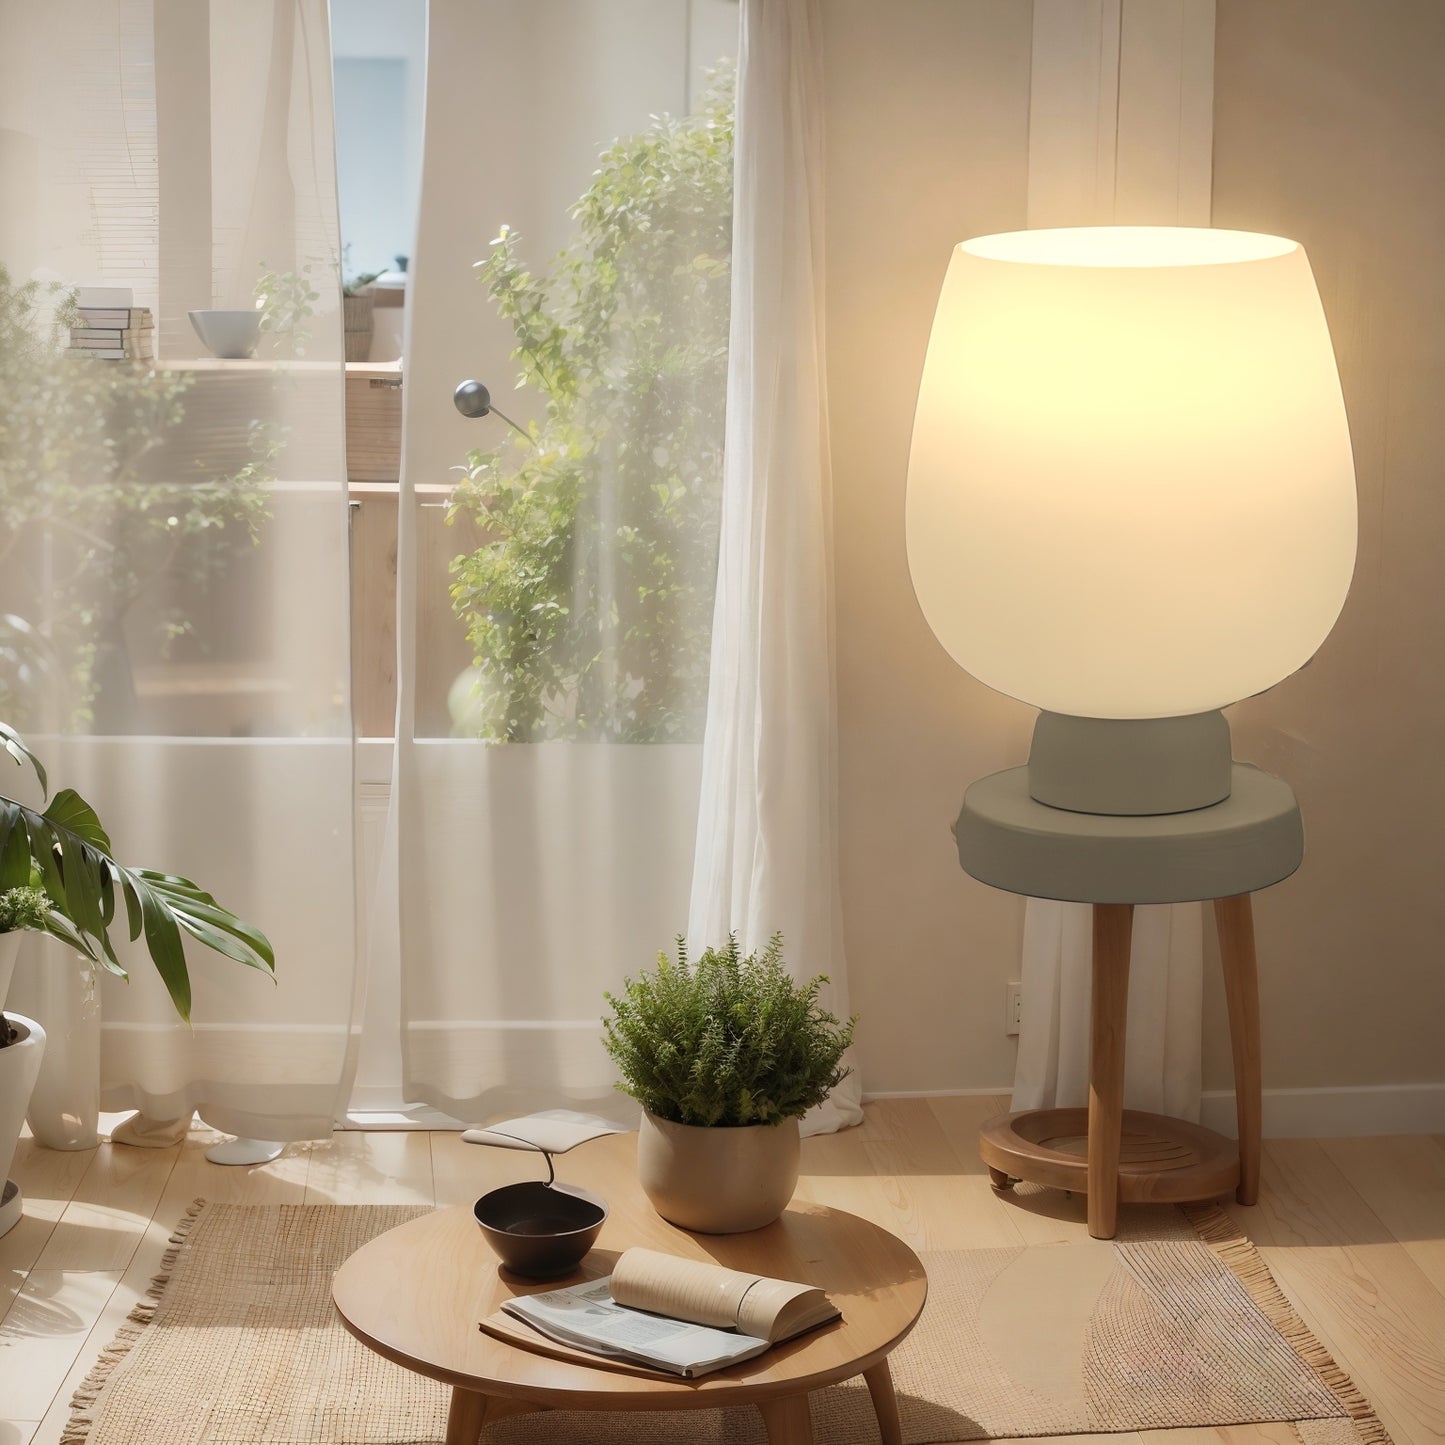 Bedroom Touch Bedside Lamp with 2 USB Plugs and Adjustable Touch Control, Bedroom Study Decorative Nightlight with Opal Glass Lampshade